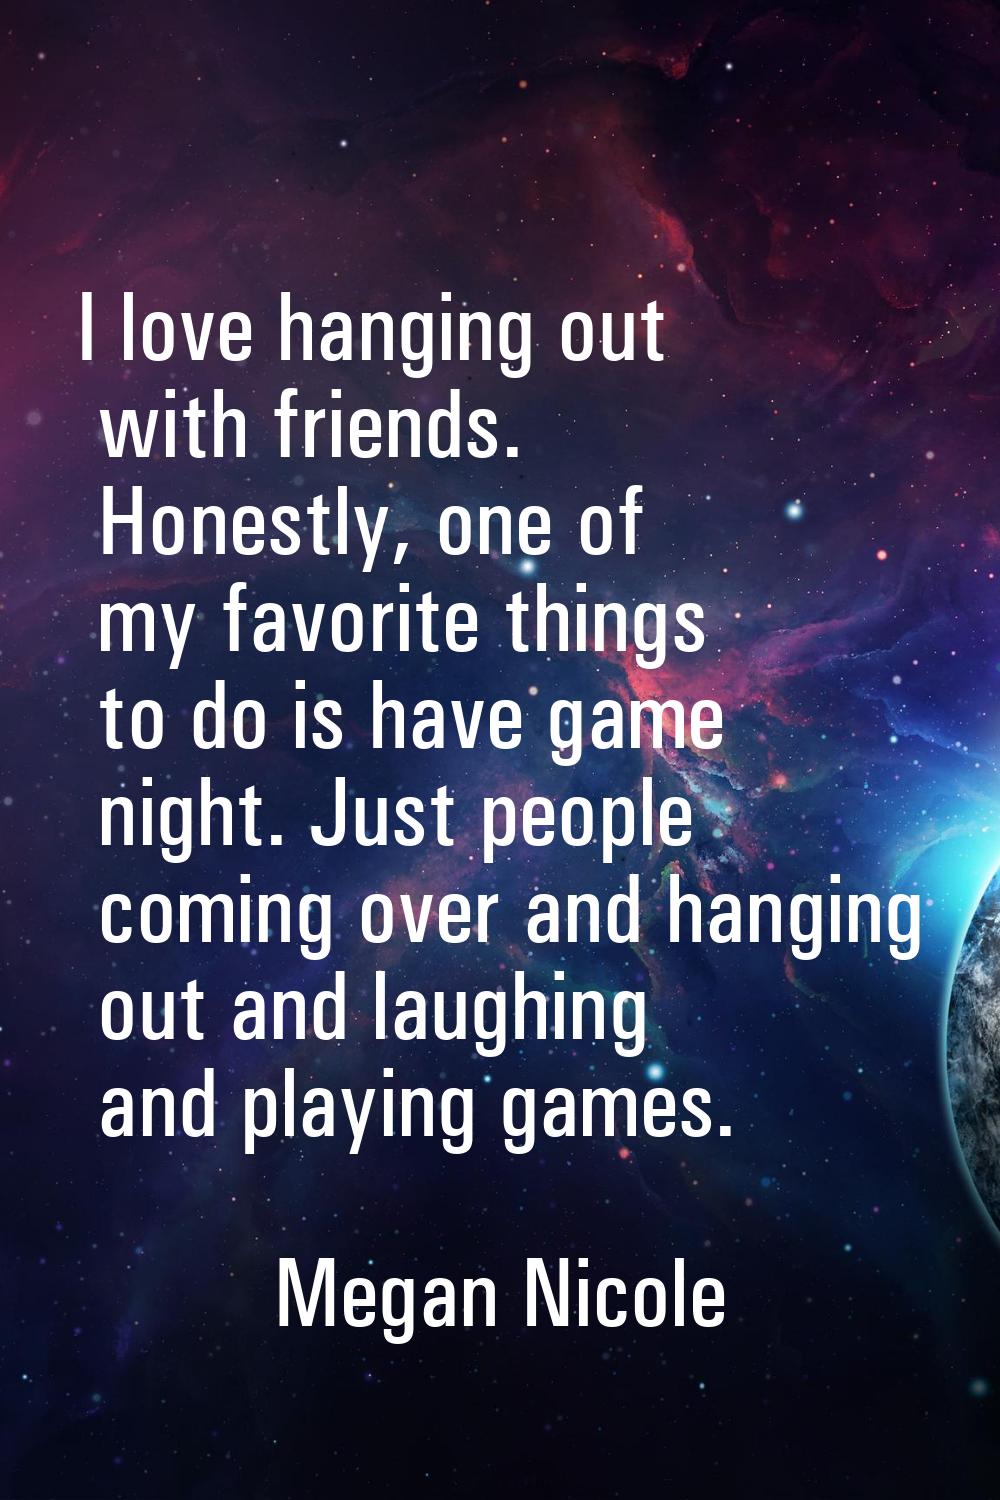 I love hanging out with friends. Honestly, one of my favorite things to do is have game night. Just